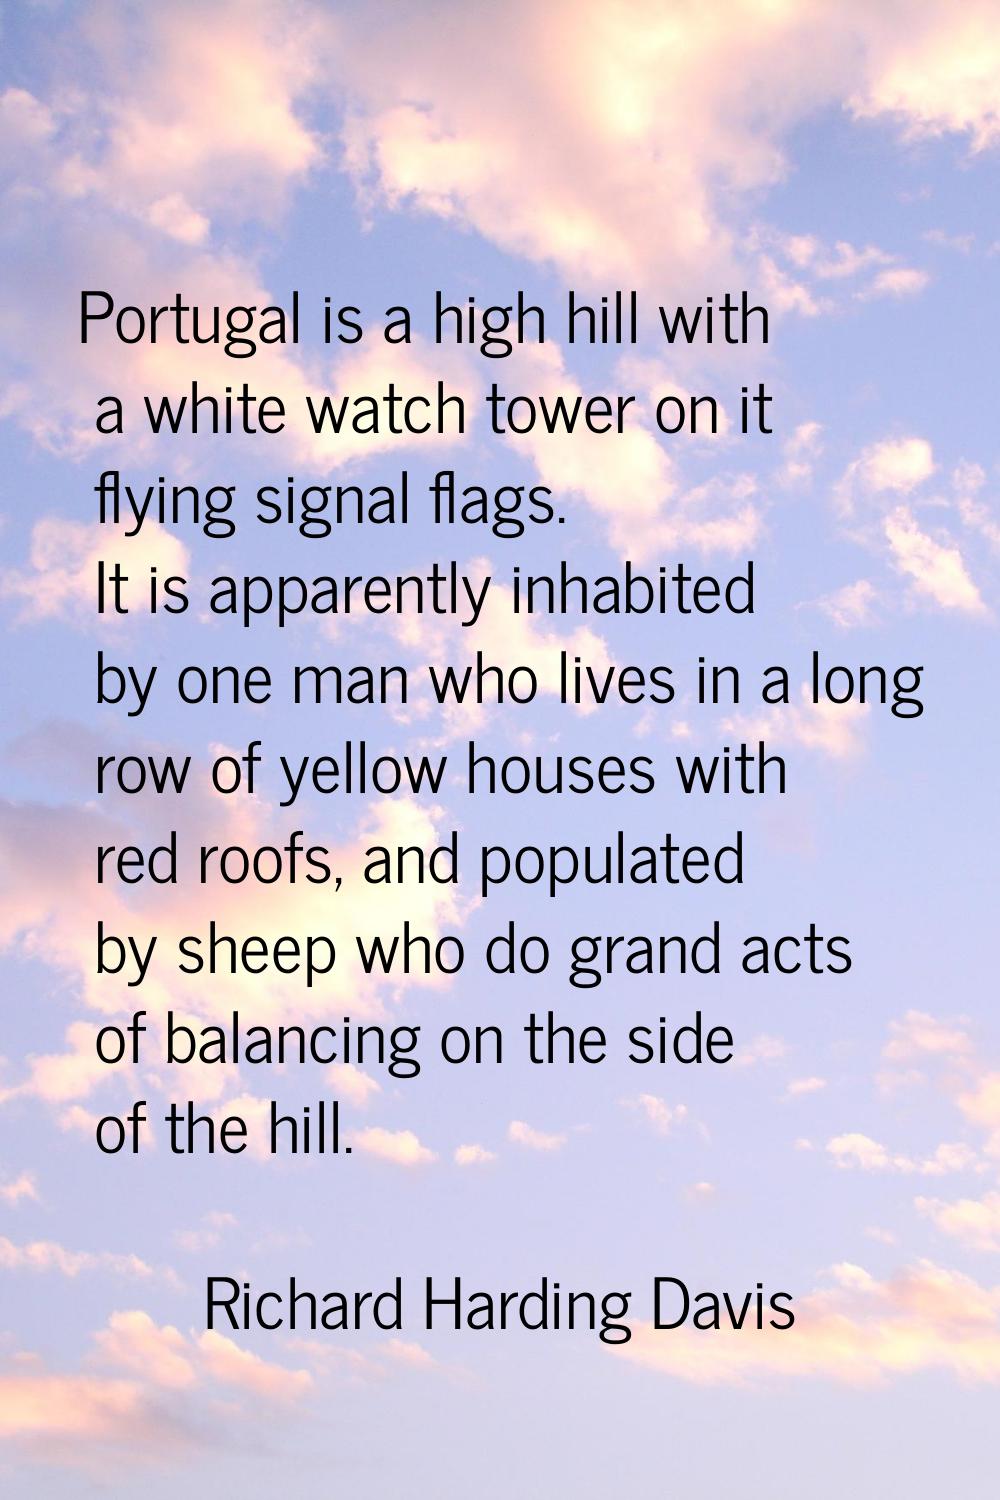 Portugal is a high hill with a white watch tower on it flying signal flags. It is apparently inhabi